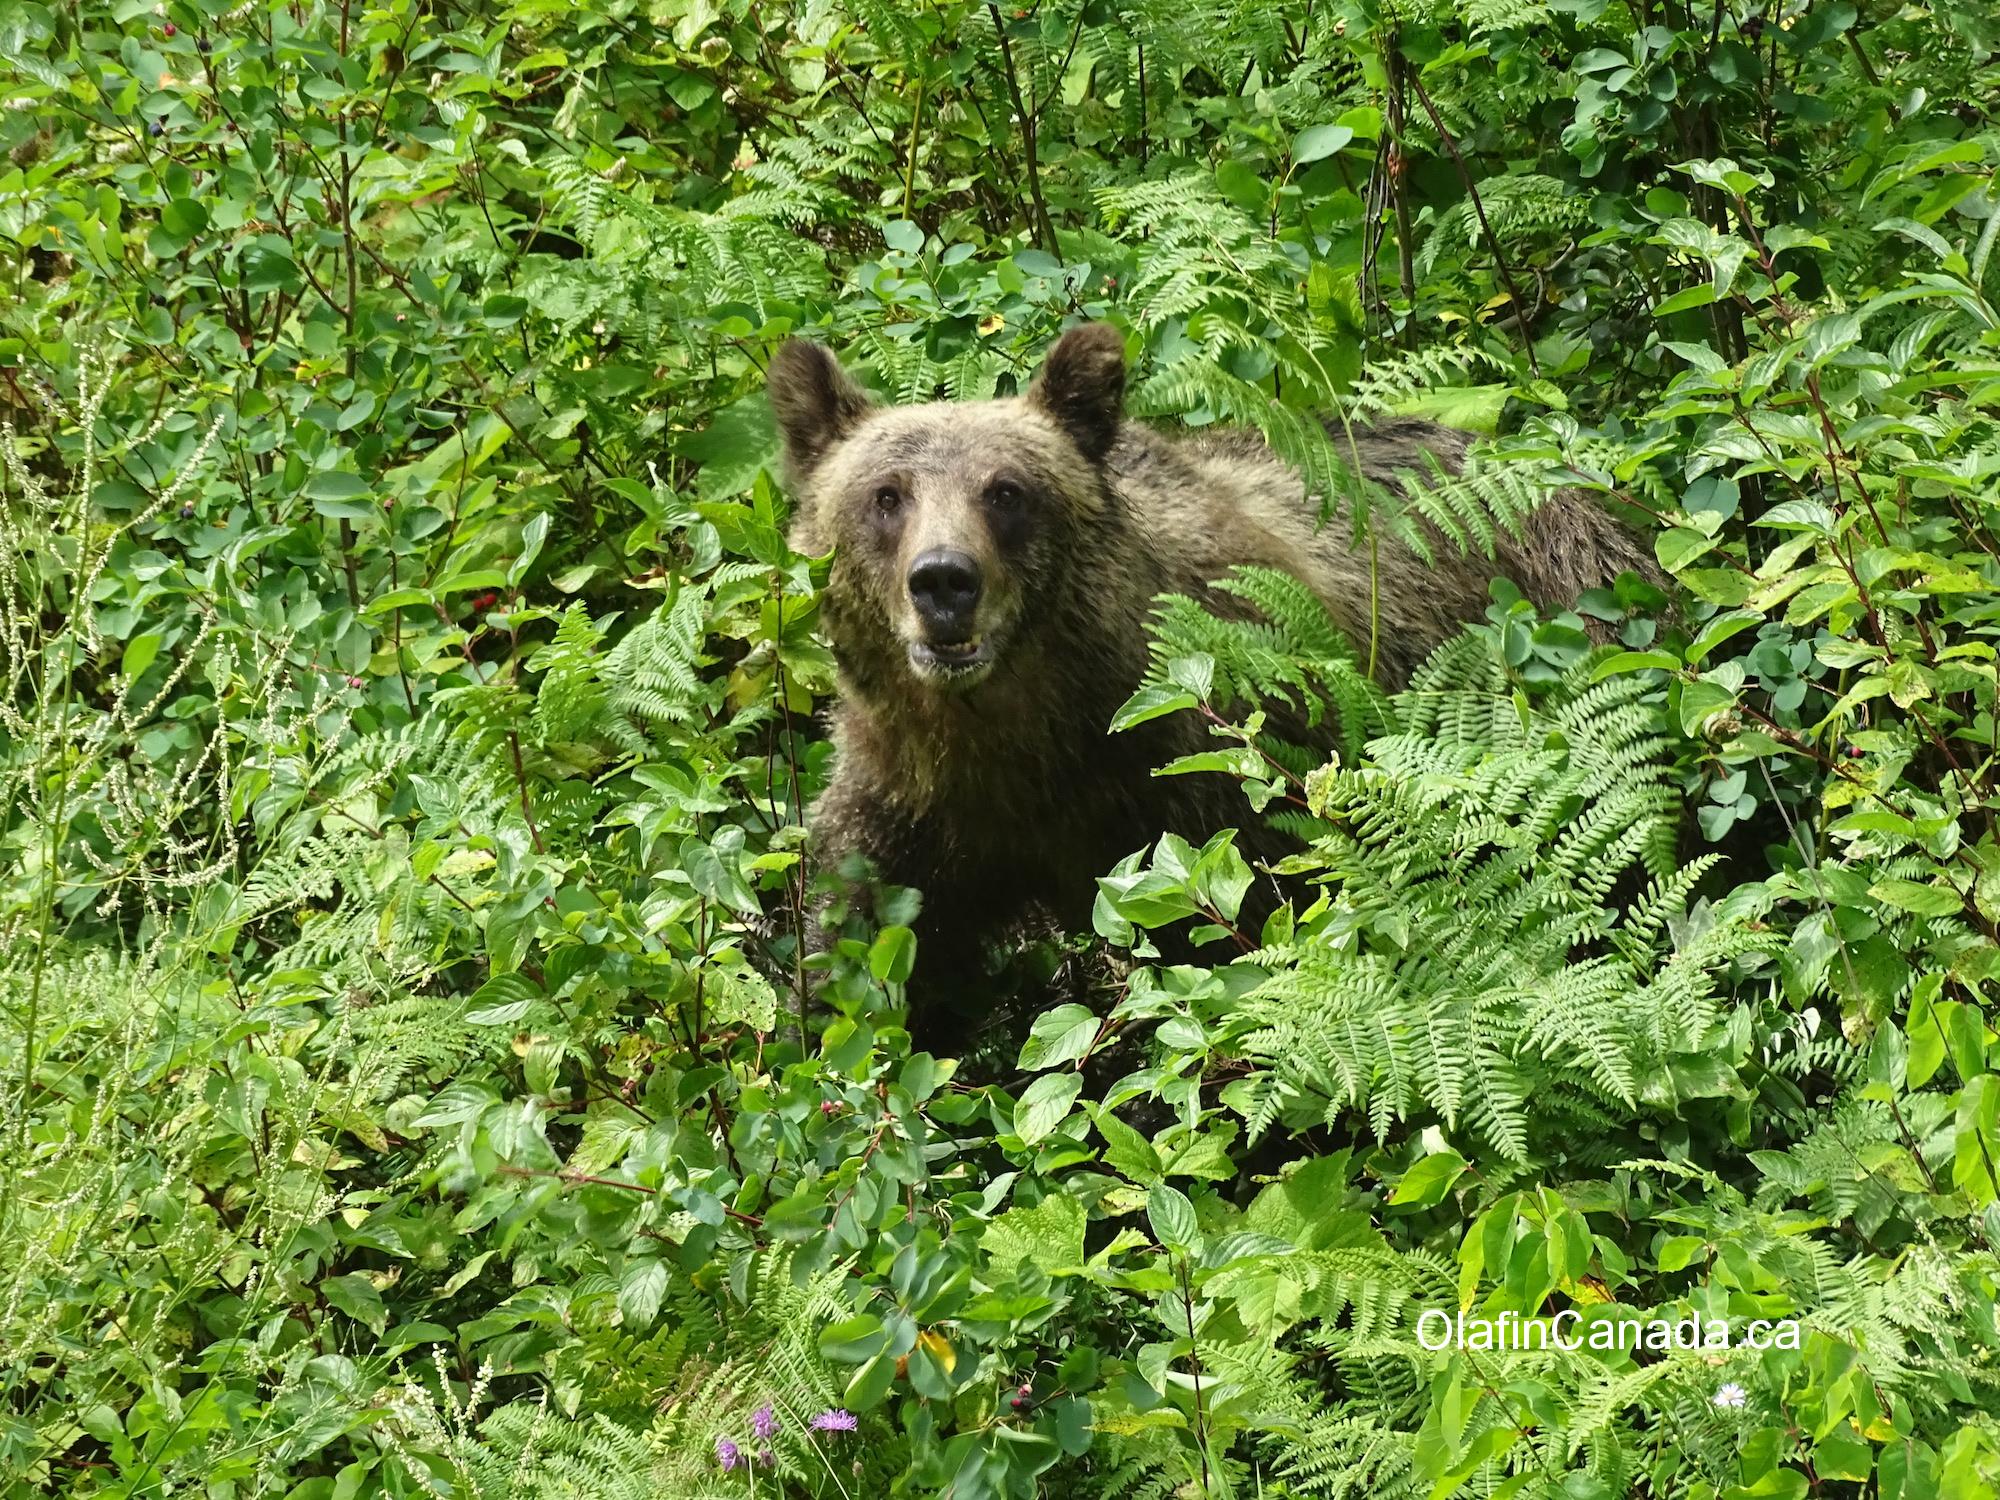 Grizzly bear in the Valley of the Ghosts #olafincanada #britishcolumbia #discoverbc #wildlife #grizzlybear